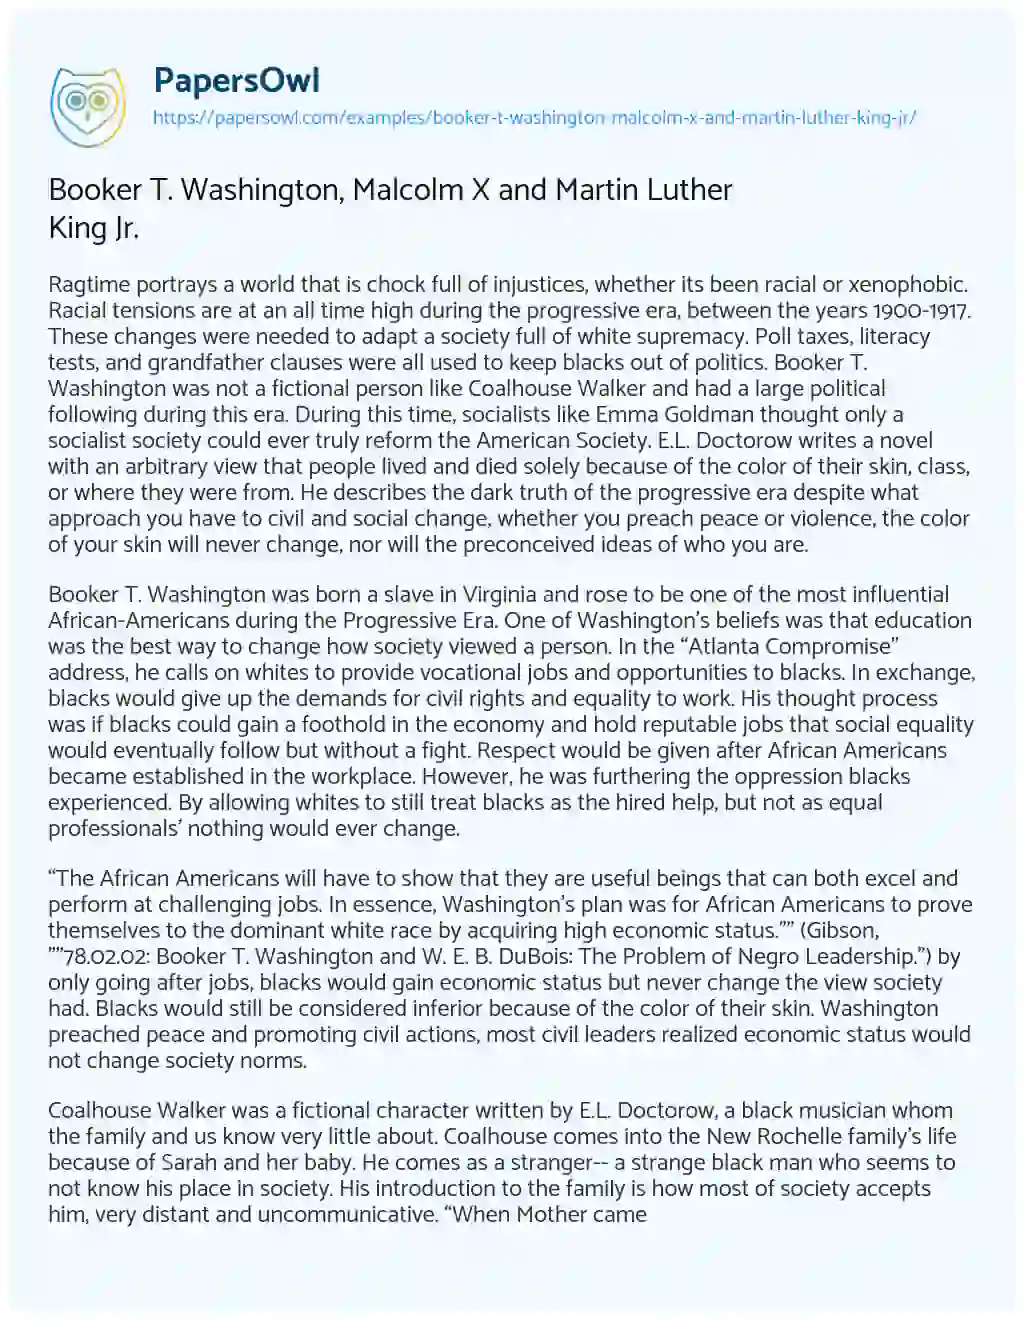 Essay on Booker T. Washington, Malcolm X and Martin Luther King Jr.